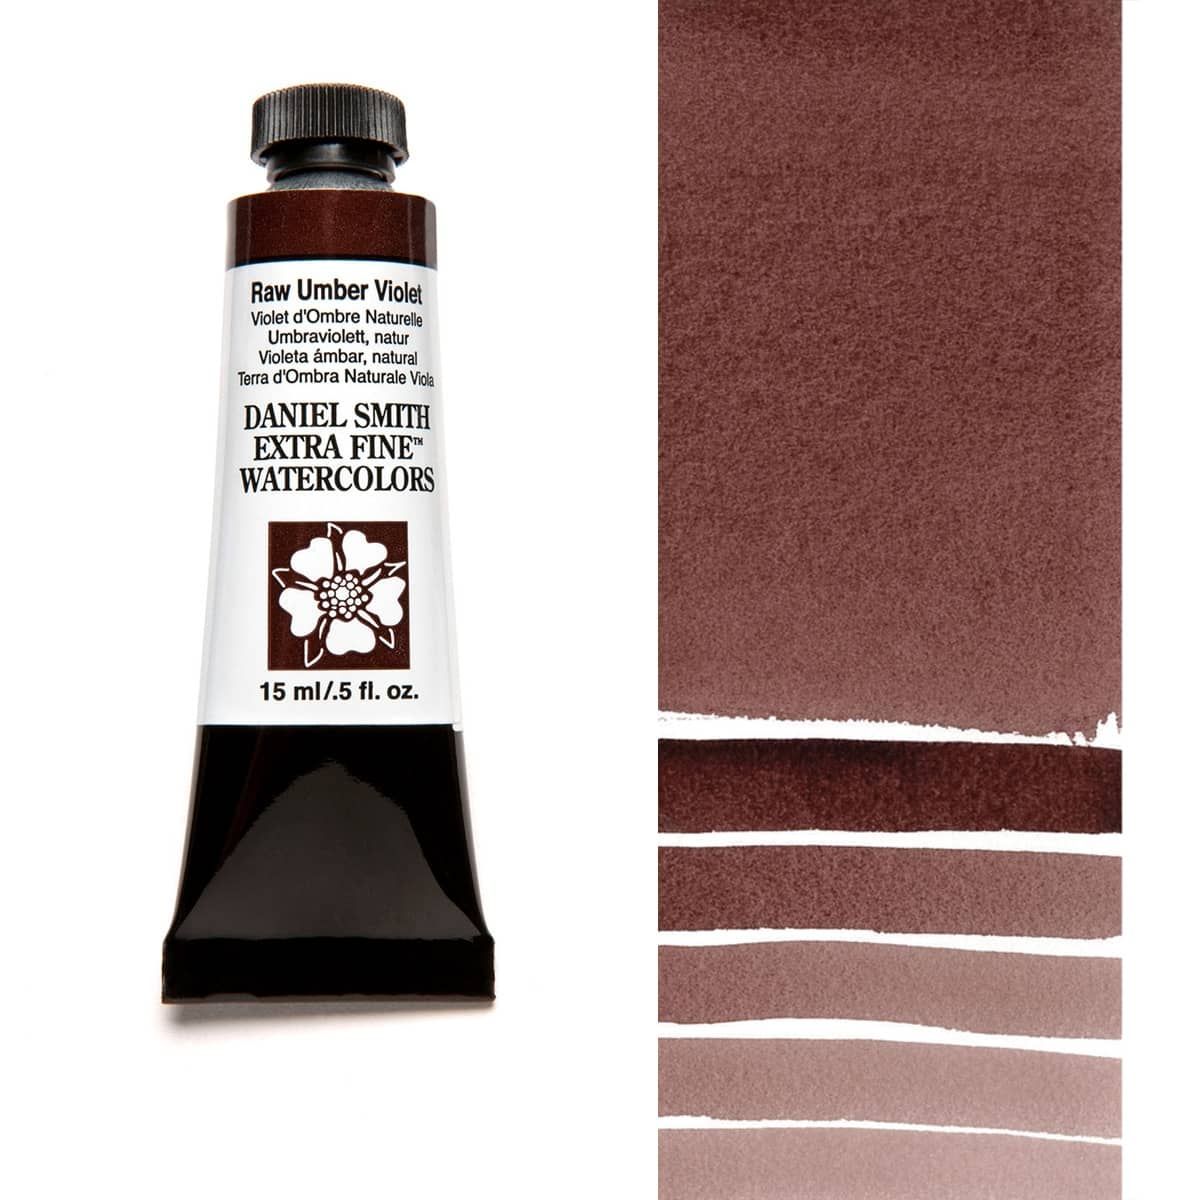 Daniel Smith Extra Fine Watercolors - Raw Umber Violet, 15 ml Tube